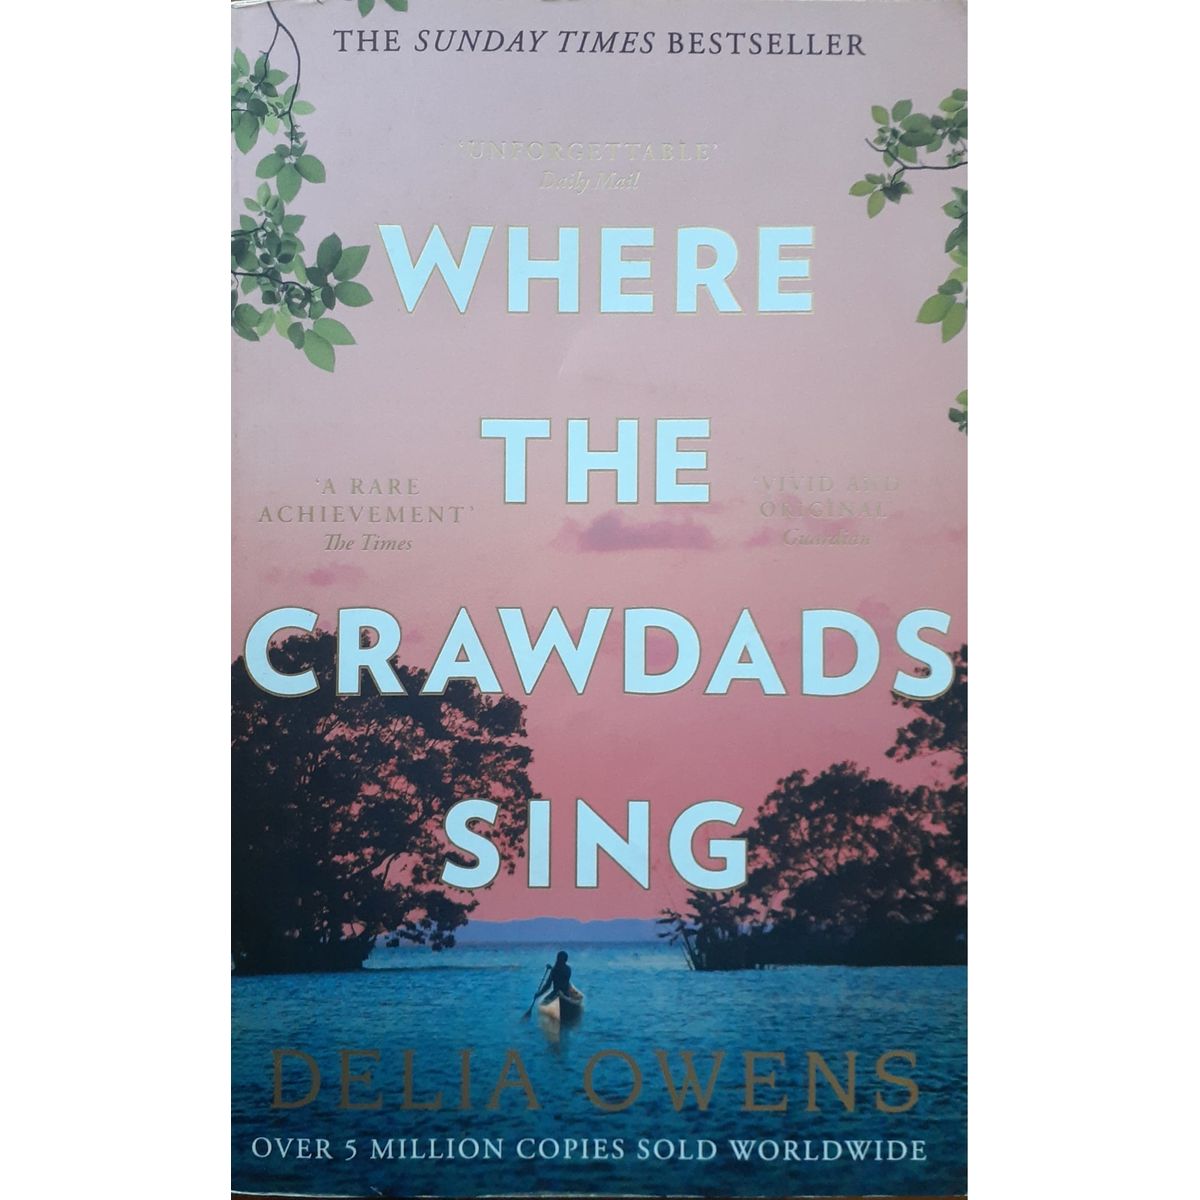 ISBN: 9781472154668 / 1472154665 - Where the Crawdads Sing by Delia Owens [2019]